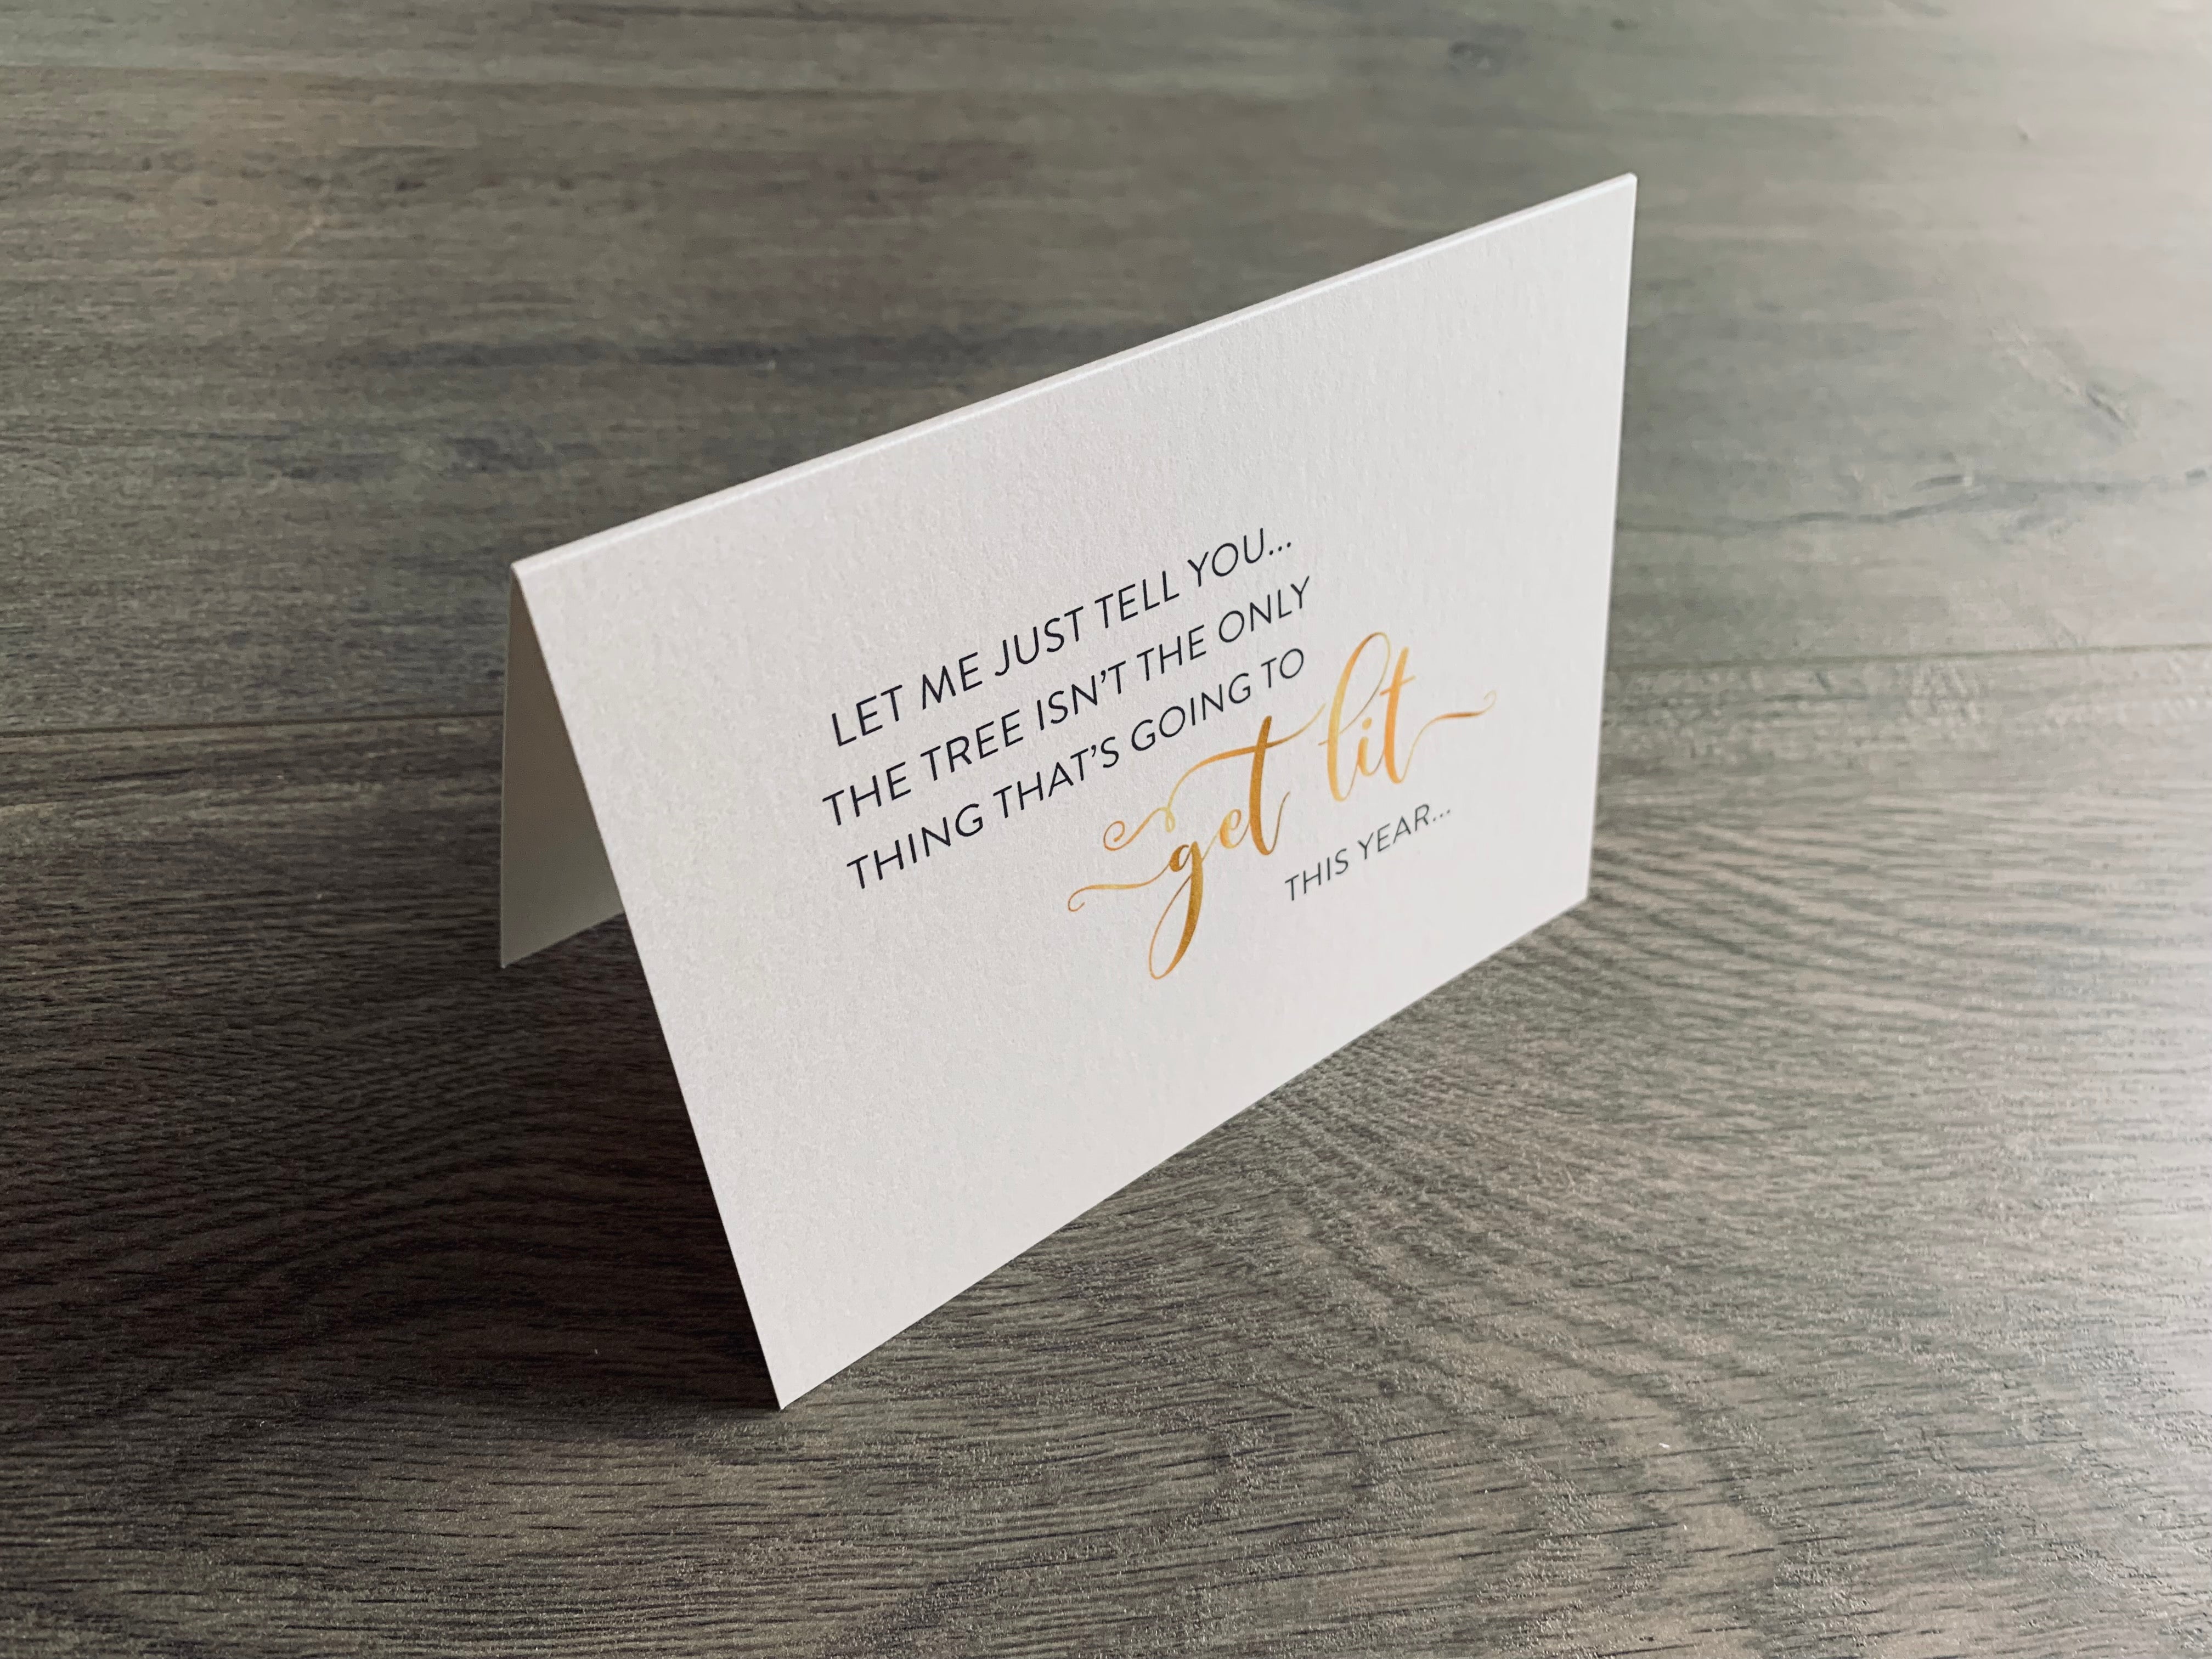 A folded notecard is propped up on a gray wood floor. The notecard is of a cream-colored pearlized paper. The card says, "Let me just tell you... the tree isn't the only thing that's going to get lit this year." Christmas Chuckles collection by Stationare.